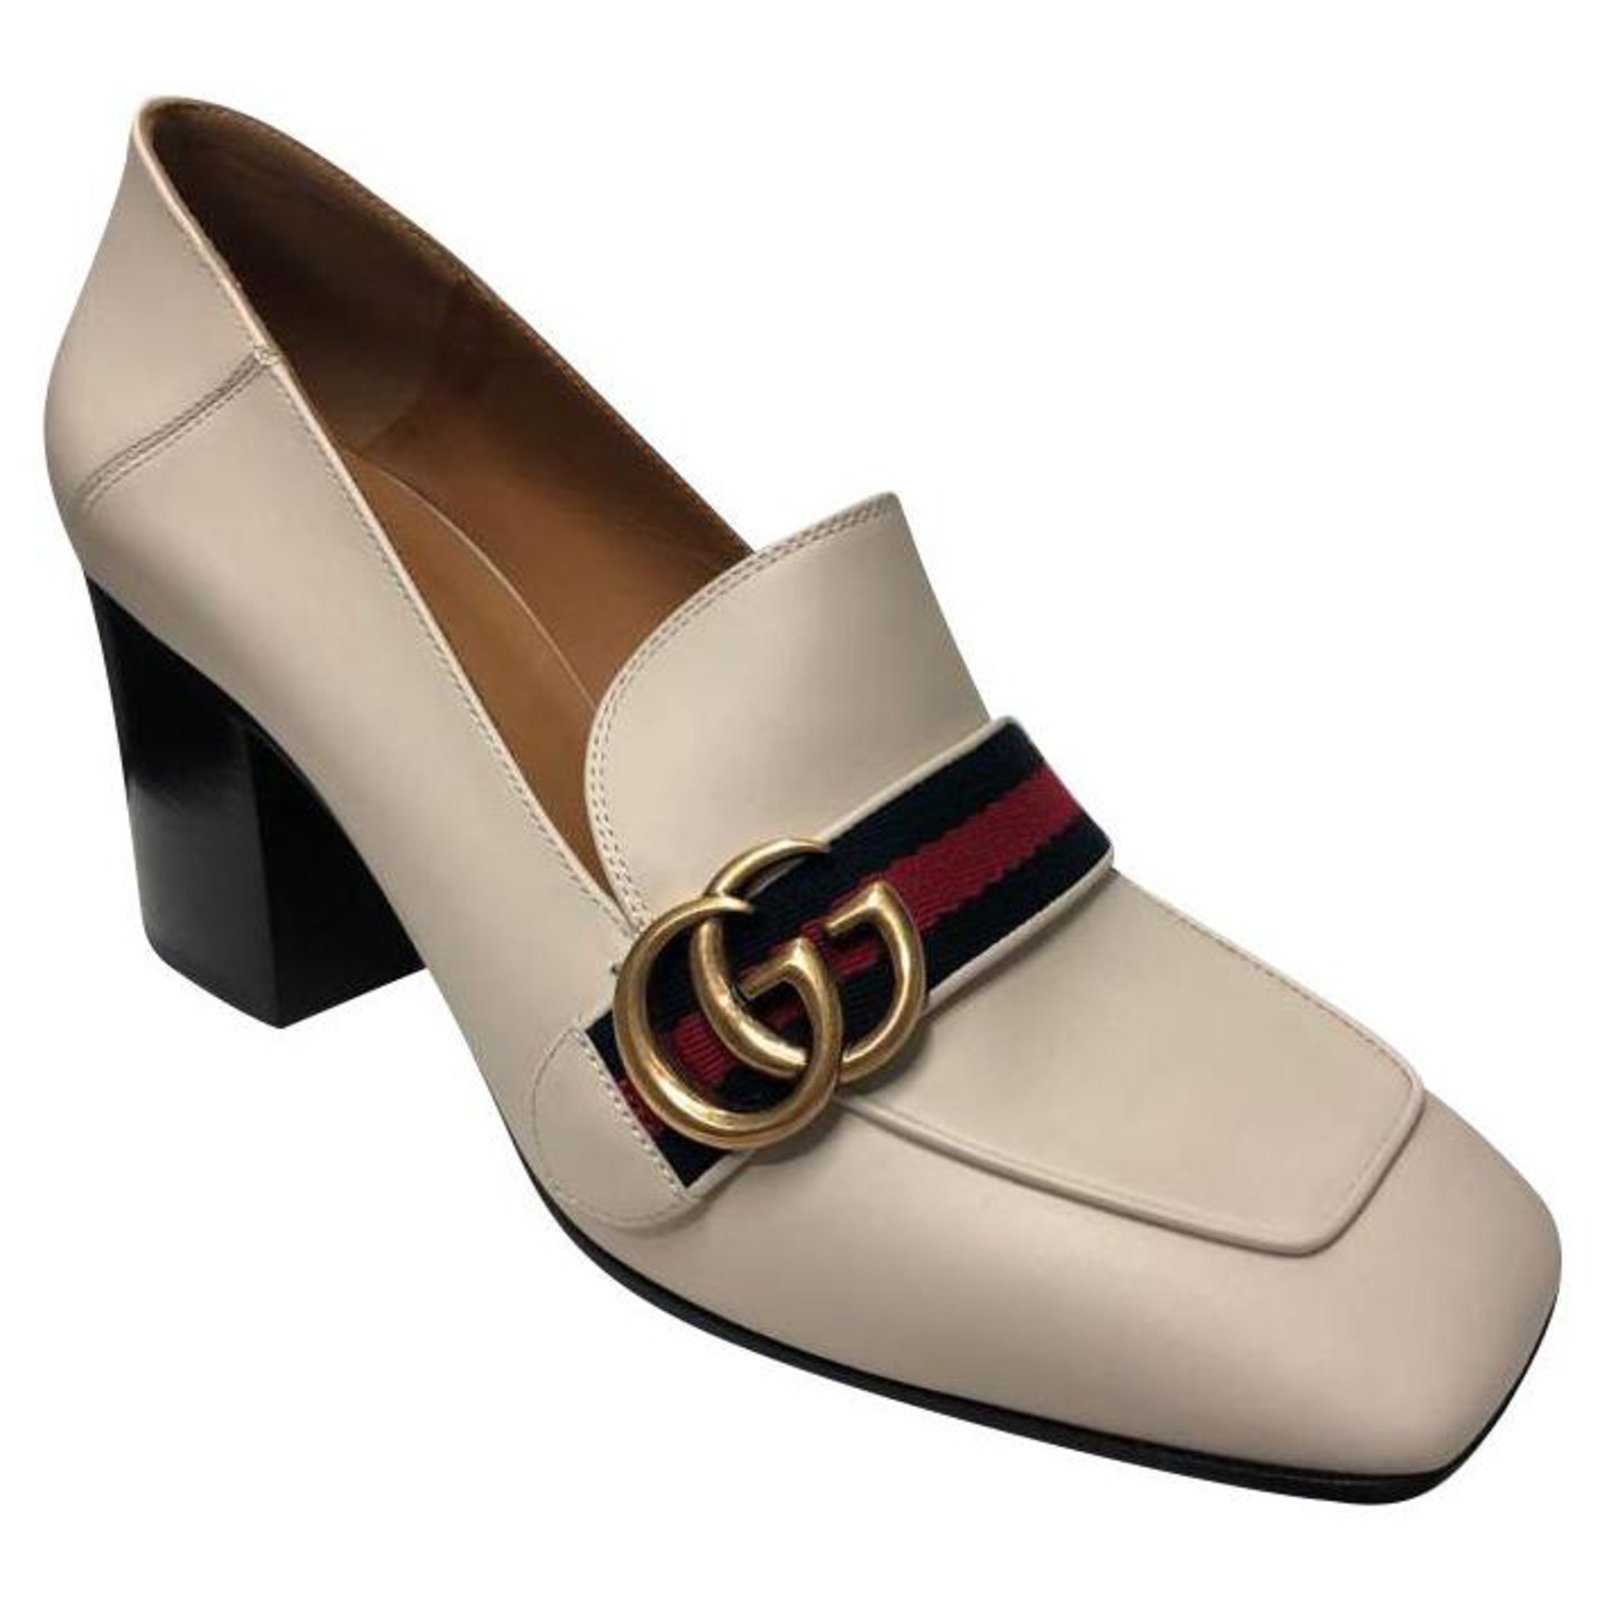 gucci leather mid heel loafer